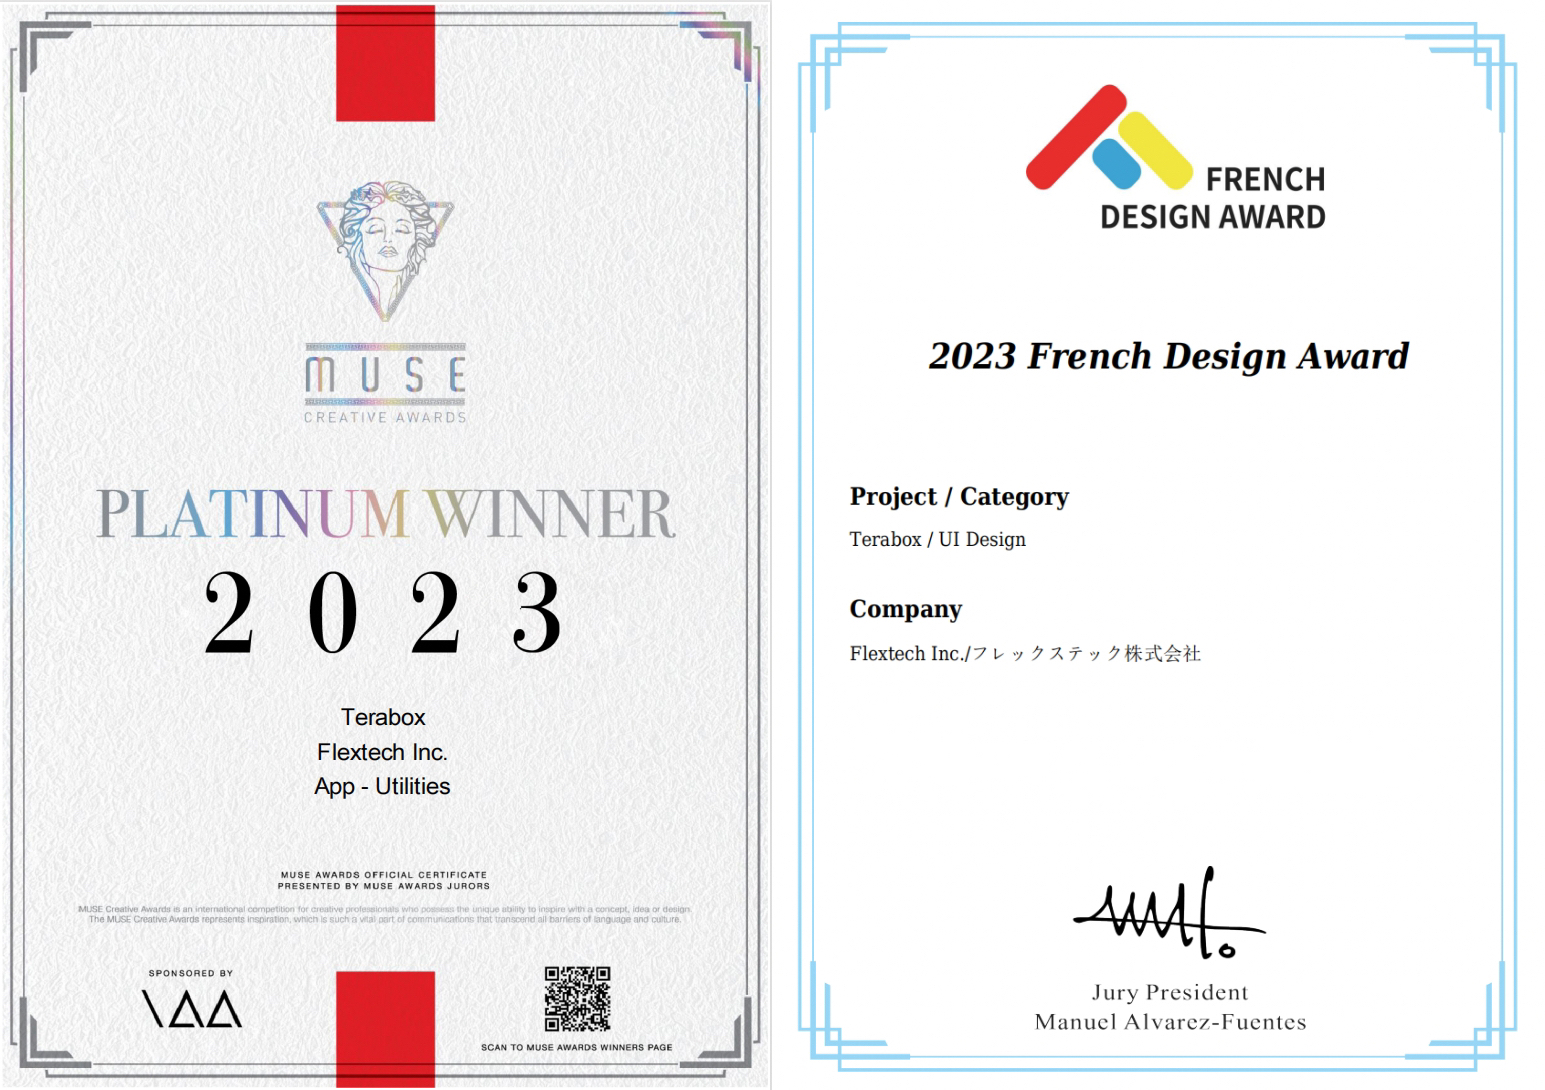 TeraBox - Muse and French Design Award